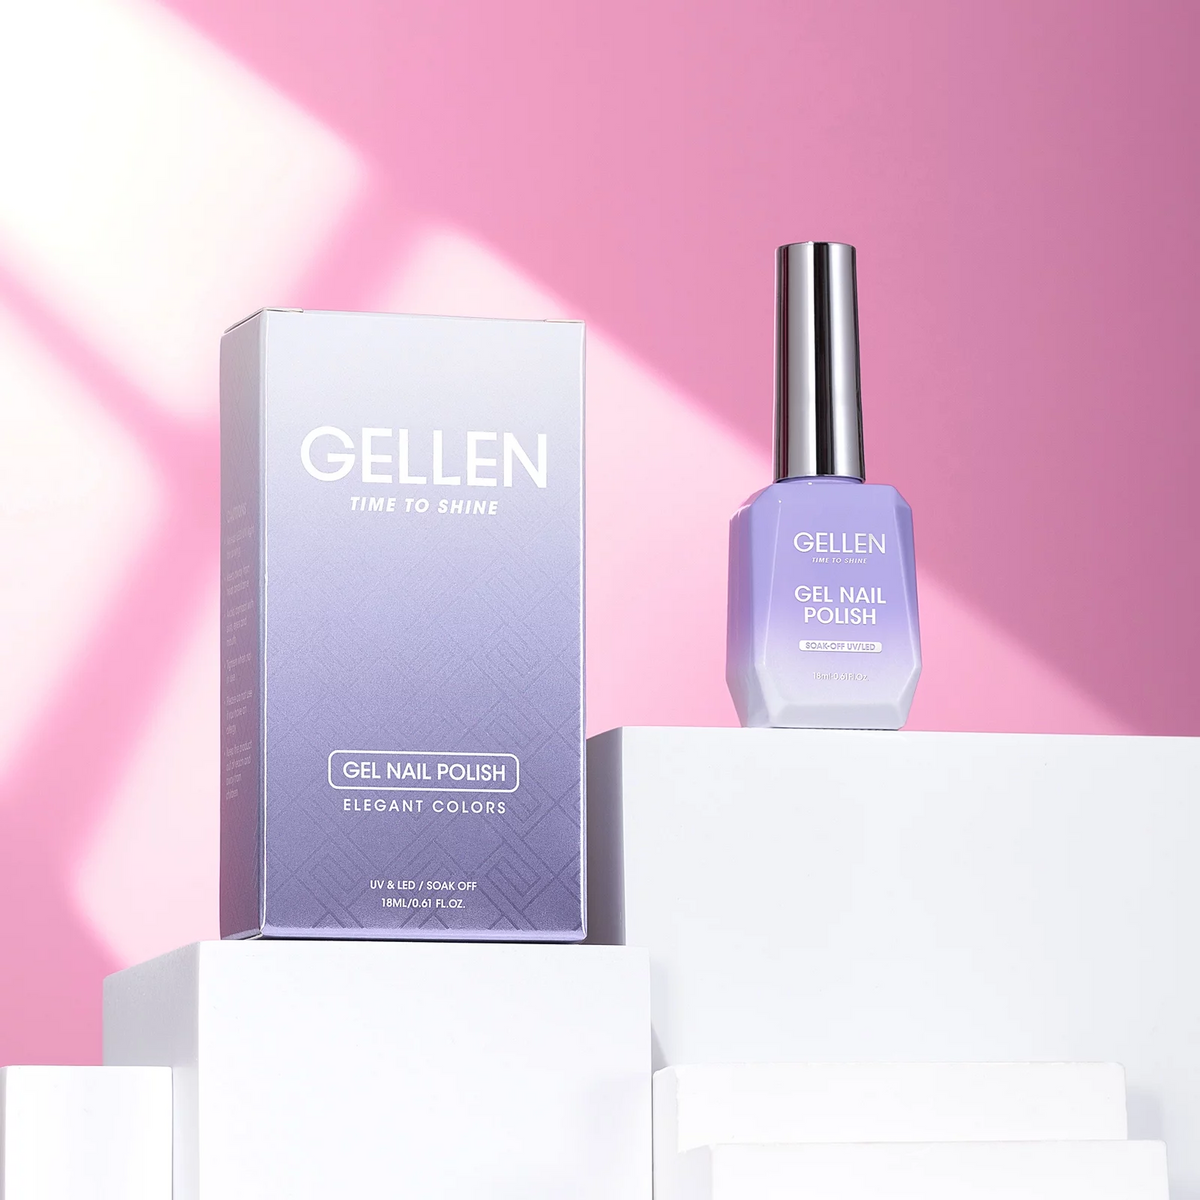 Gellen Gel Nail Polish - 18ml Light Baby Pink Soak Off UV LED Gel Polish for Stunning Nail Art and Manicures - Perfect Gifts for Women